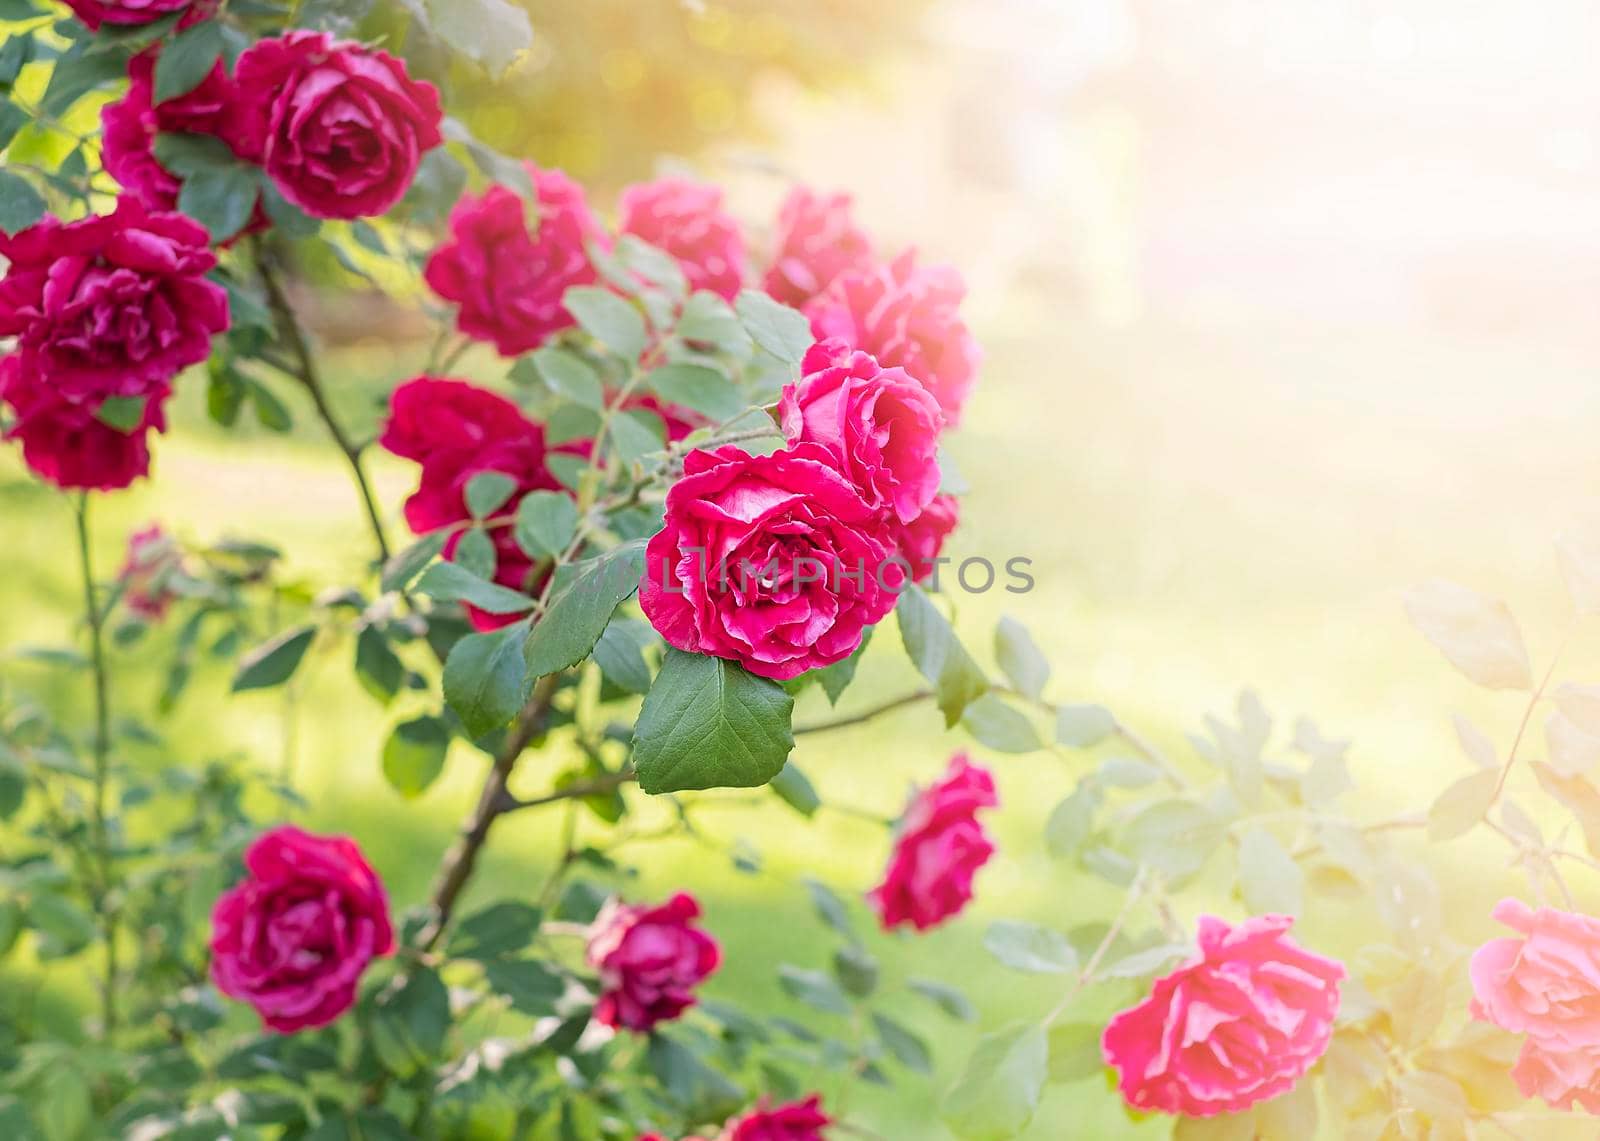 Bush pink Roses in the garden in the rays of the sun with copy space, banner